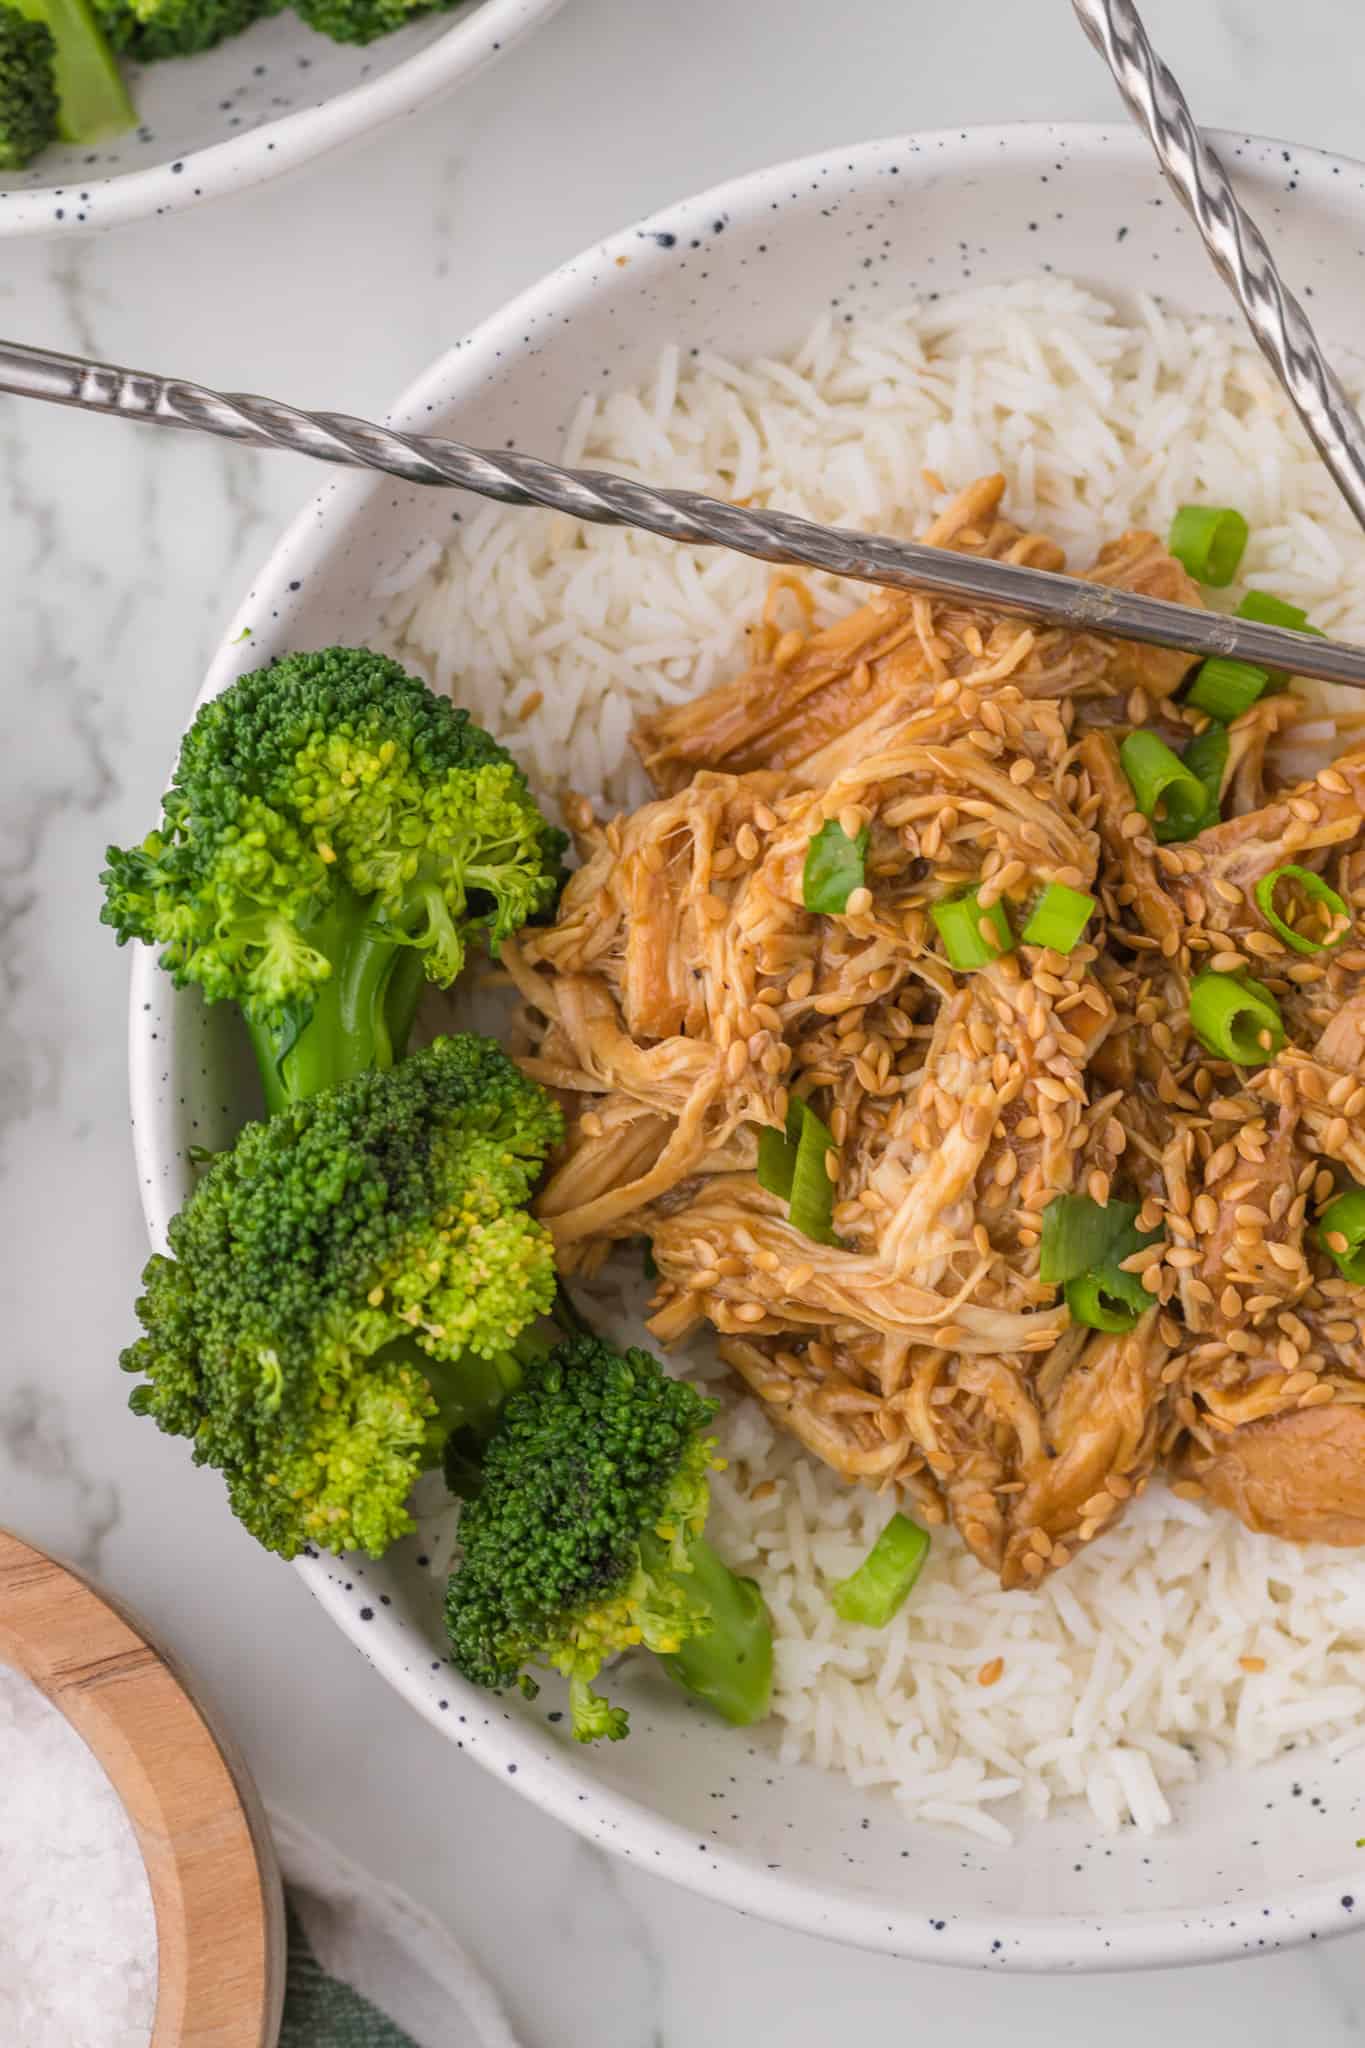 Crock Pot Teriyaki Chicken is a delicious slow cooker chicken recipe using boneless skinless chicken breasts cooked in a homemade teriyaki sauce.